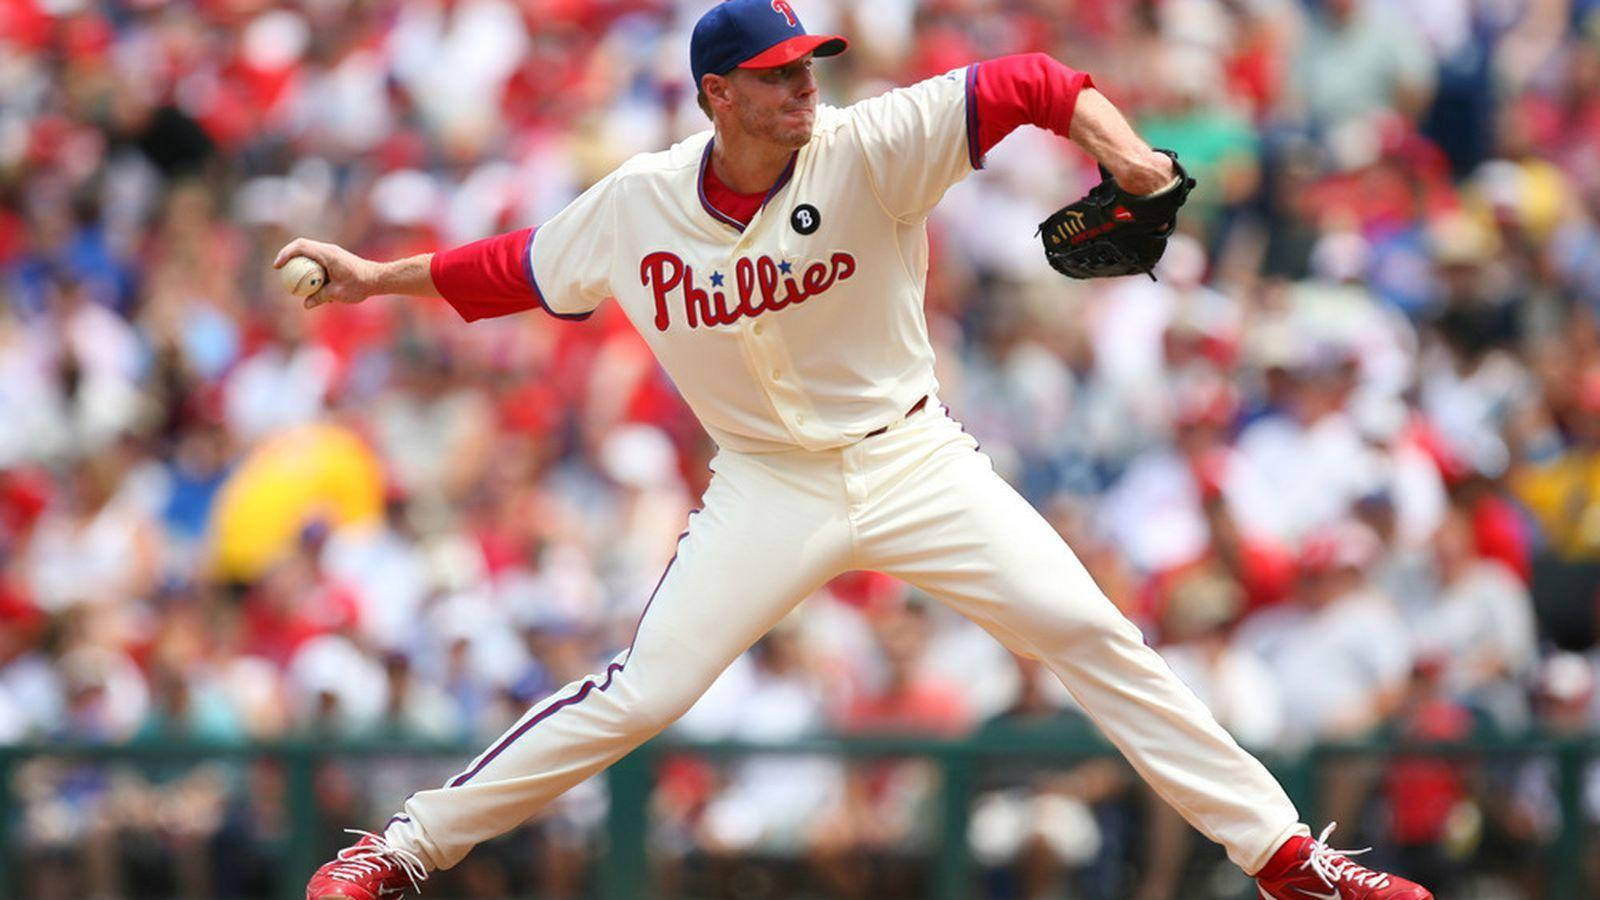 Download Roy Halladay Playing In Front Of Crowd Wallpaper